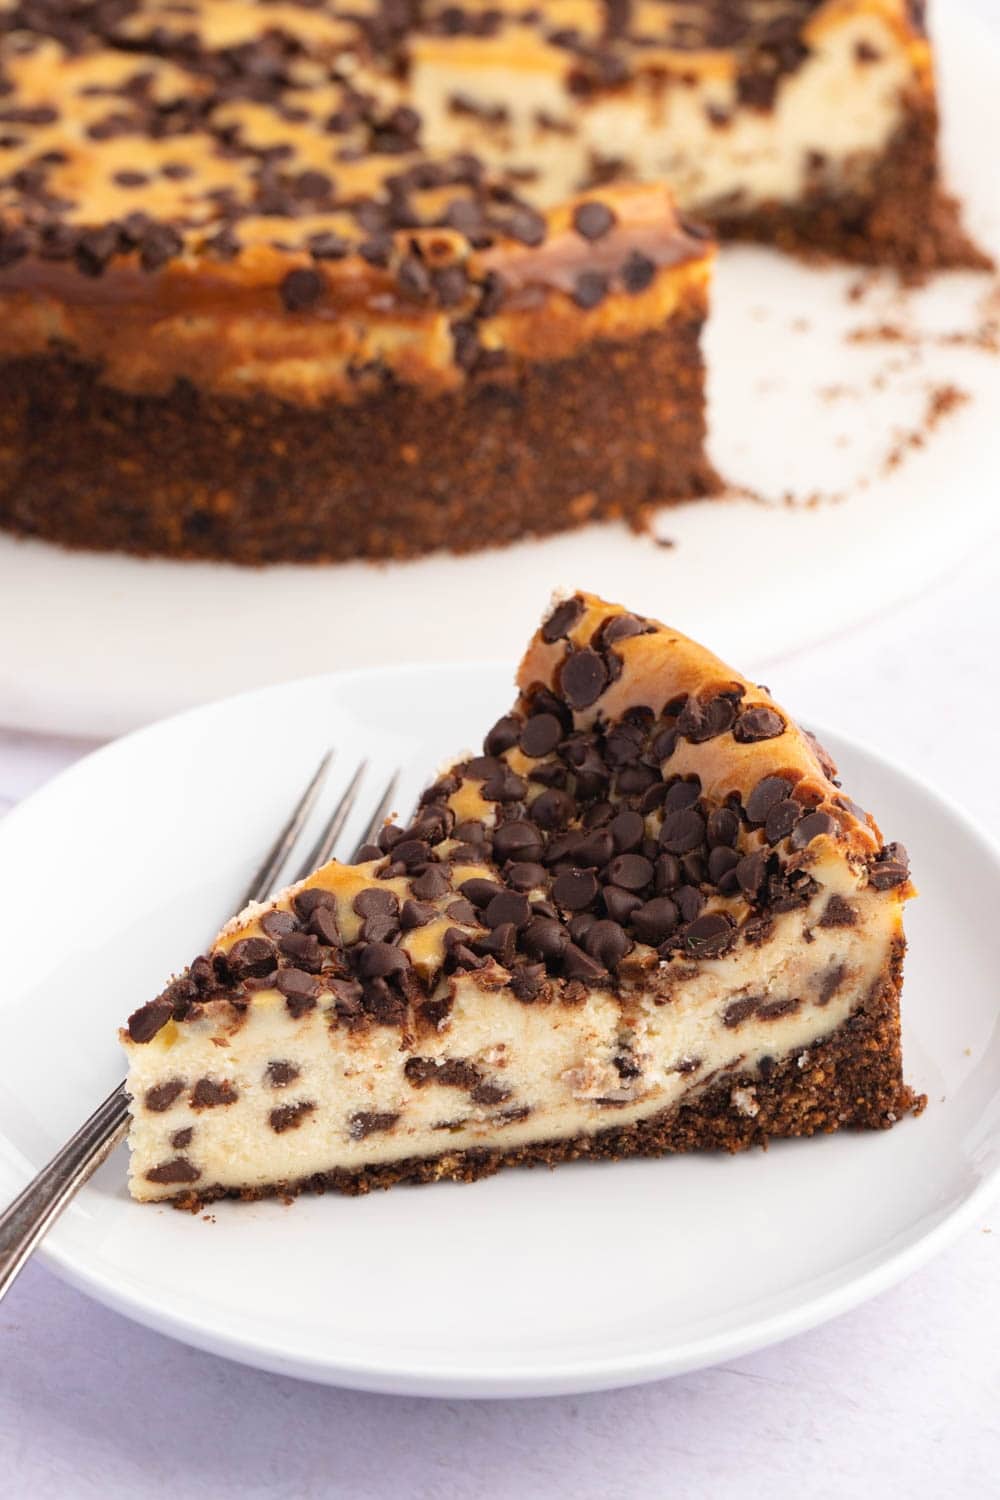 A  Loaded Slice of Chocolate Chip Cheesecake in a White Plate